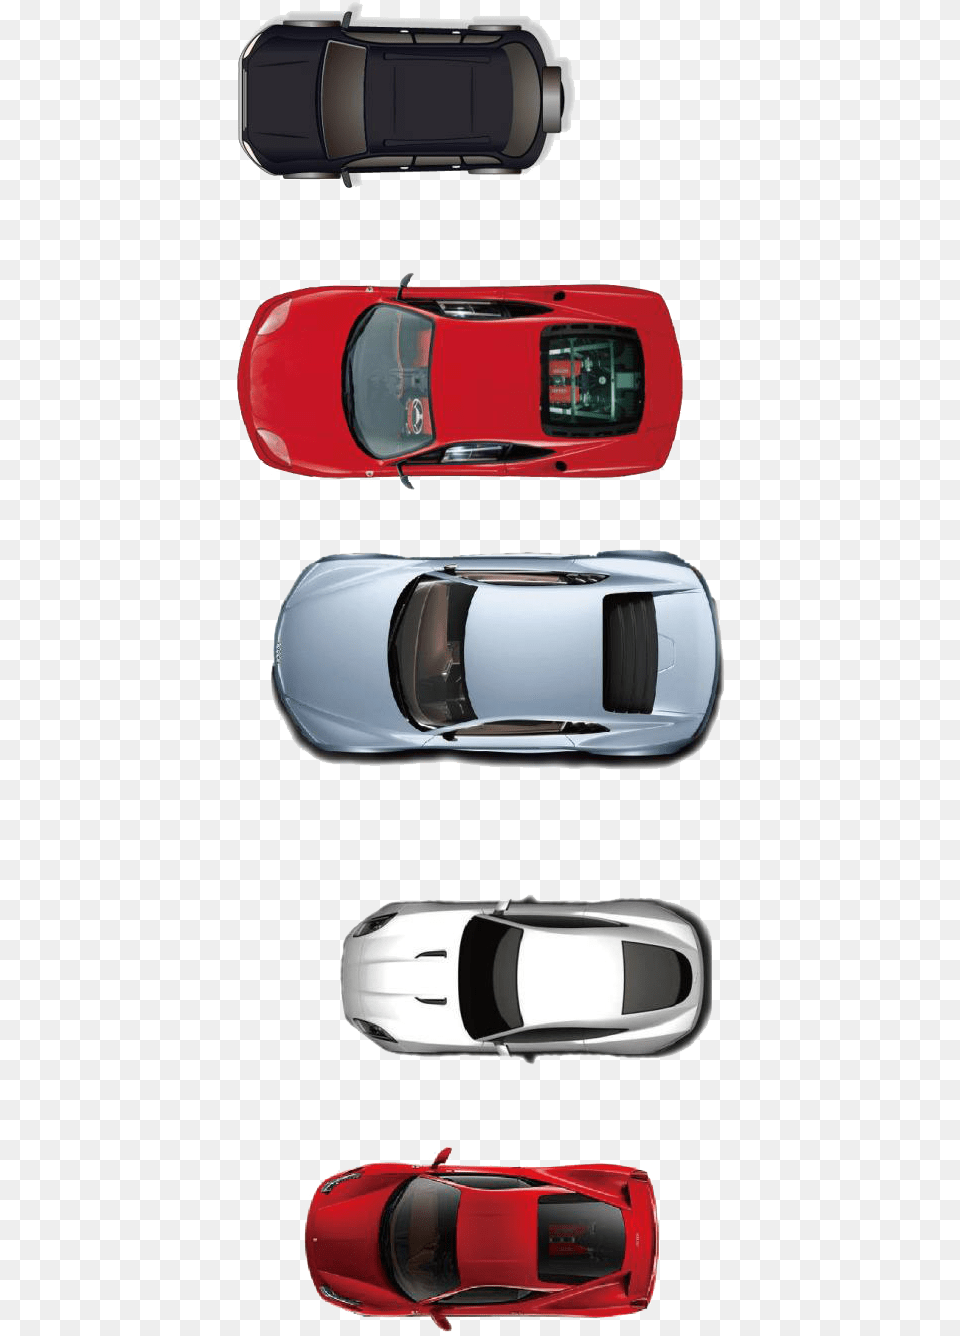 Car Top View Hd Image Clipart Plan View Cars Top View, Transportation, Vehicle Free Png Download